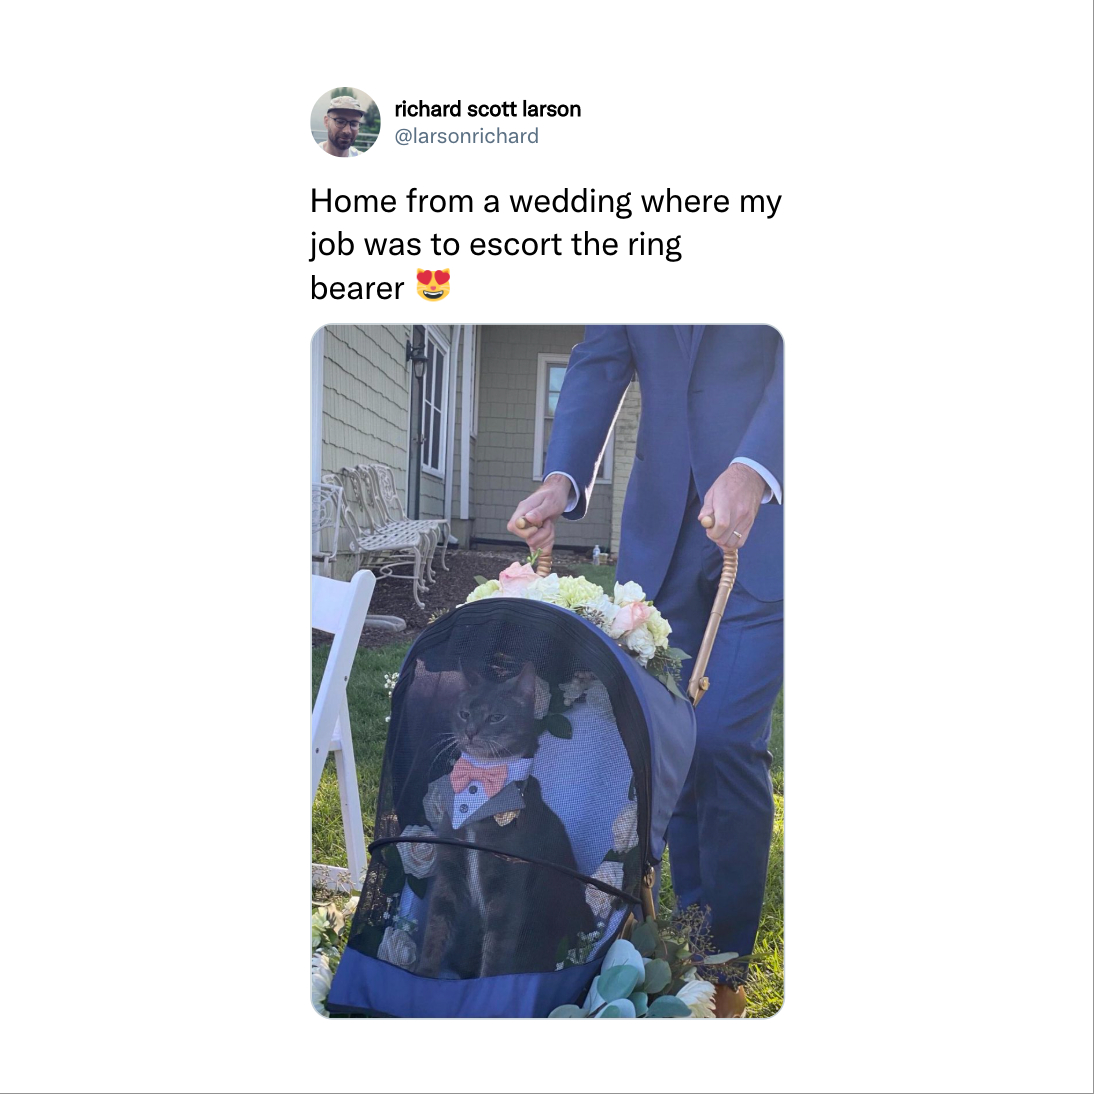 funny tweets - Wedding - richard scott larson Home from a wedding where my job was to escort the ring bearer